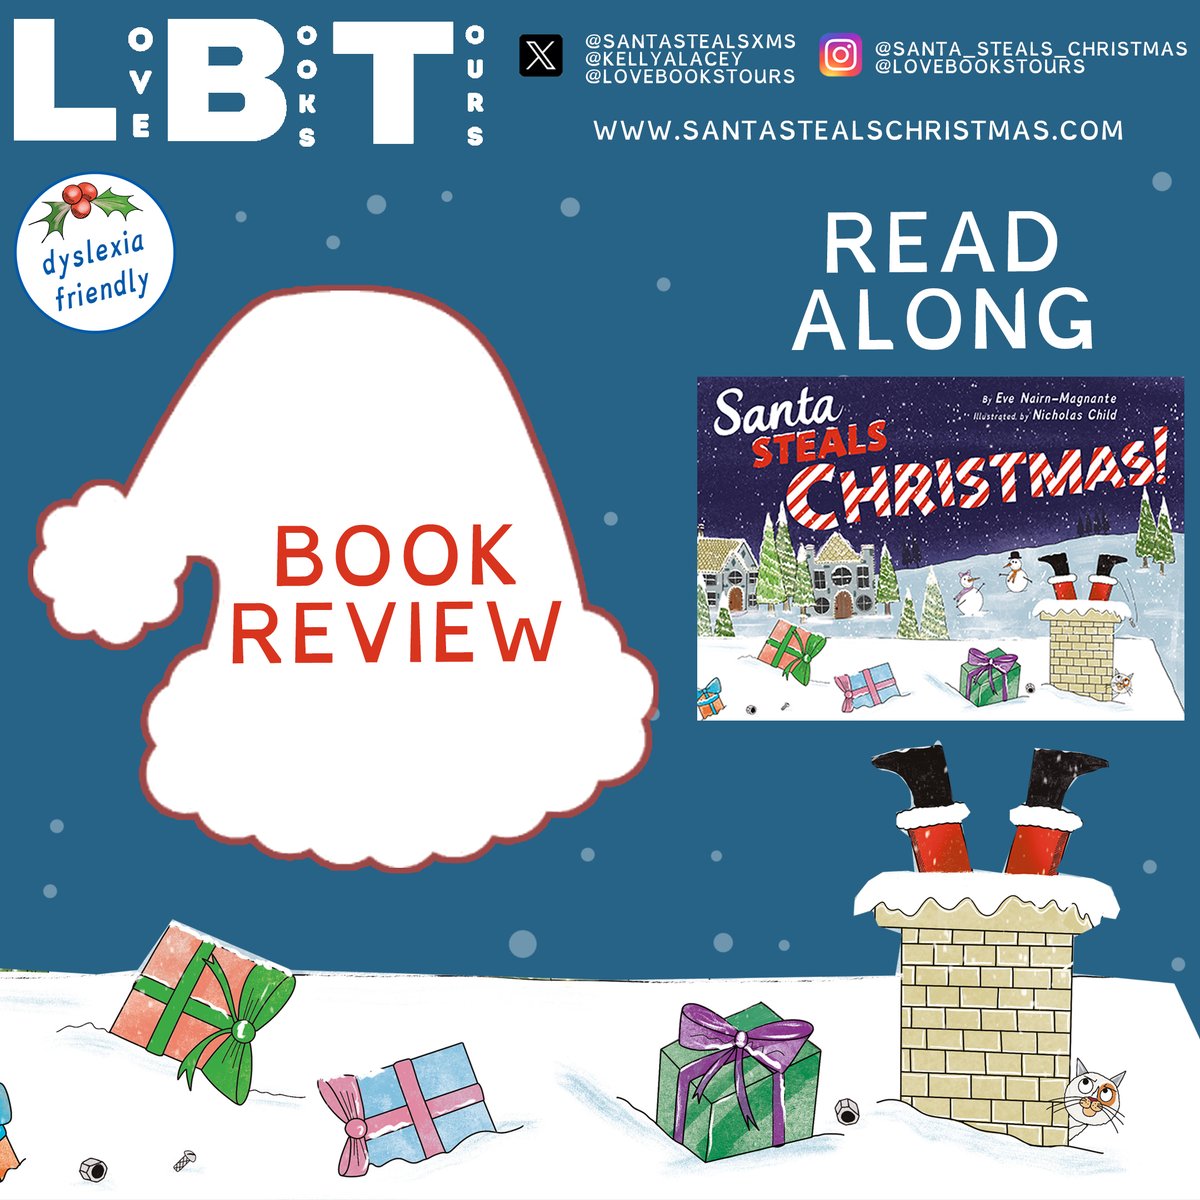 🎅🤶READALONG REVIEW🤶🎅

Take a wild ride this #holiday with Santa Steals Christmas! by Eve Nairn-Magnante

@SantaStealsXms @KellyALacey @lovebookstours #Ad #LBTCrew #FreeTeview #DyslexiaFriendly #AccessibilityFirst #AccessibilityMatters #InclusiveBook 

amorinacarlton.com/2023/11/30/rea…